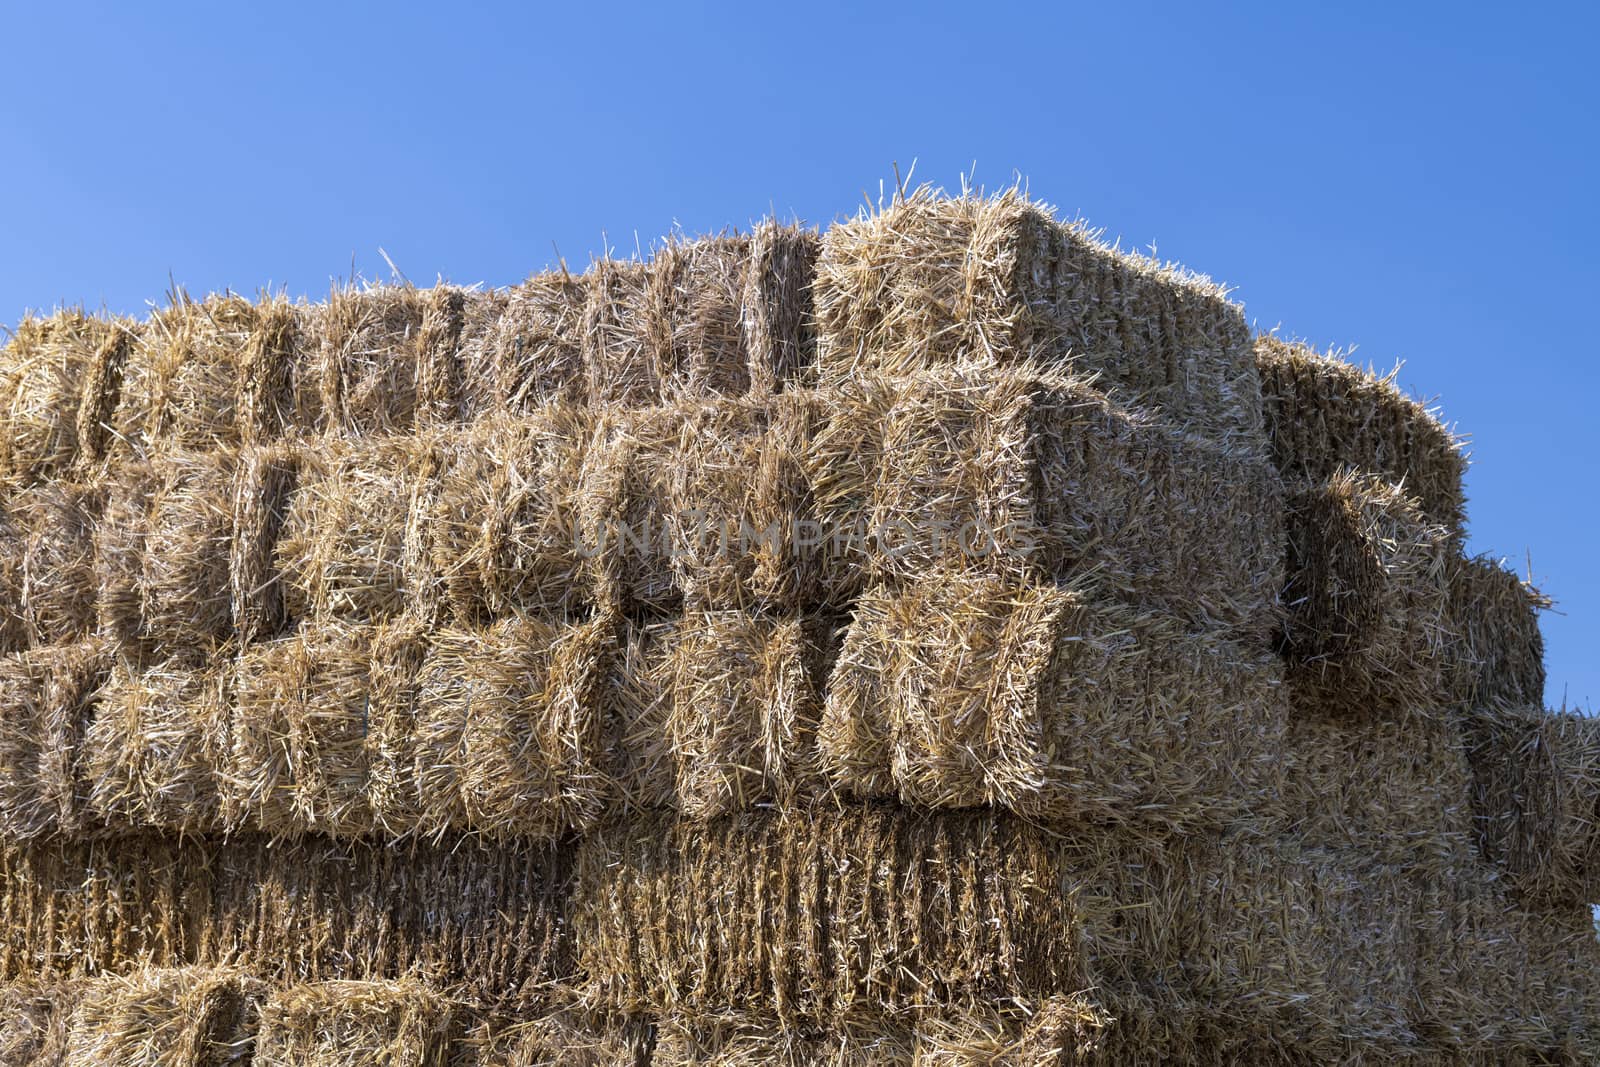 Stack of straw bales against a blue sky
 by Tofotografie